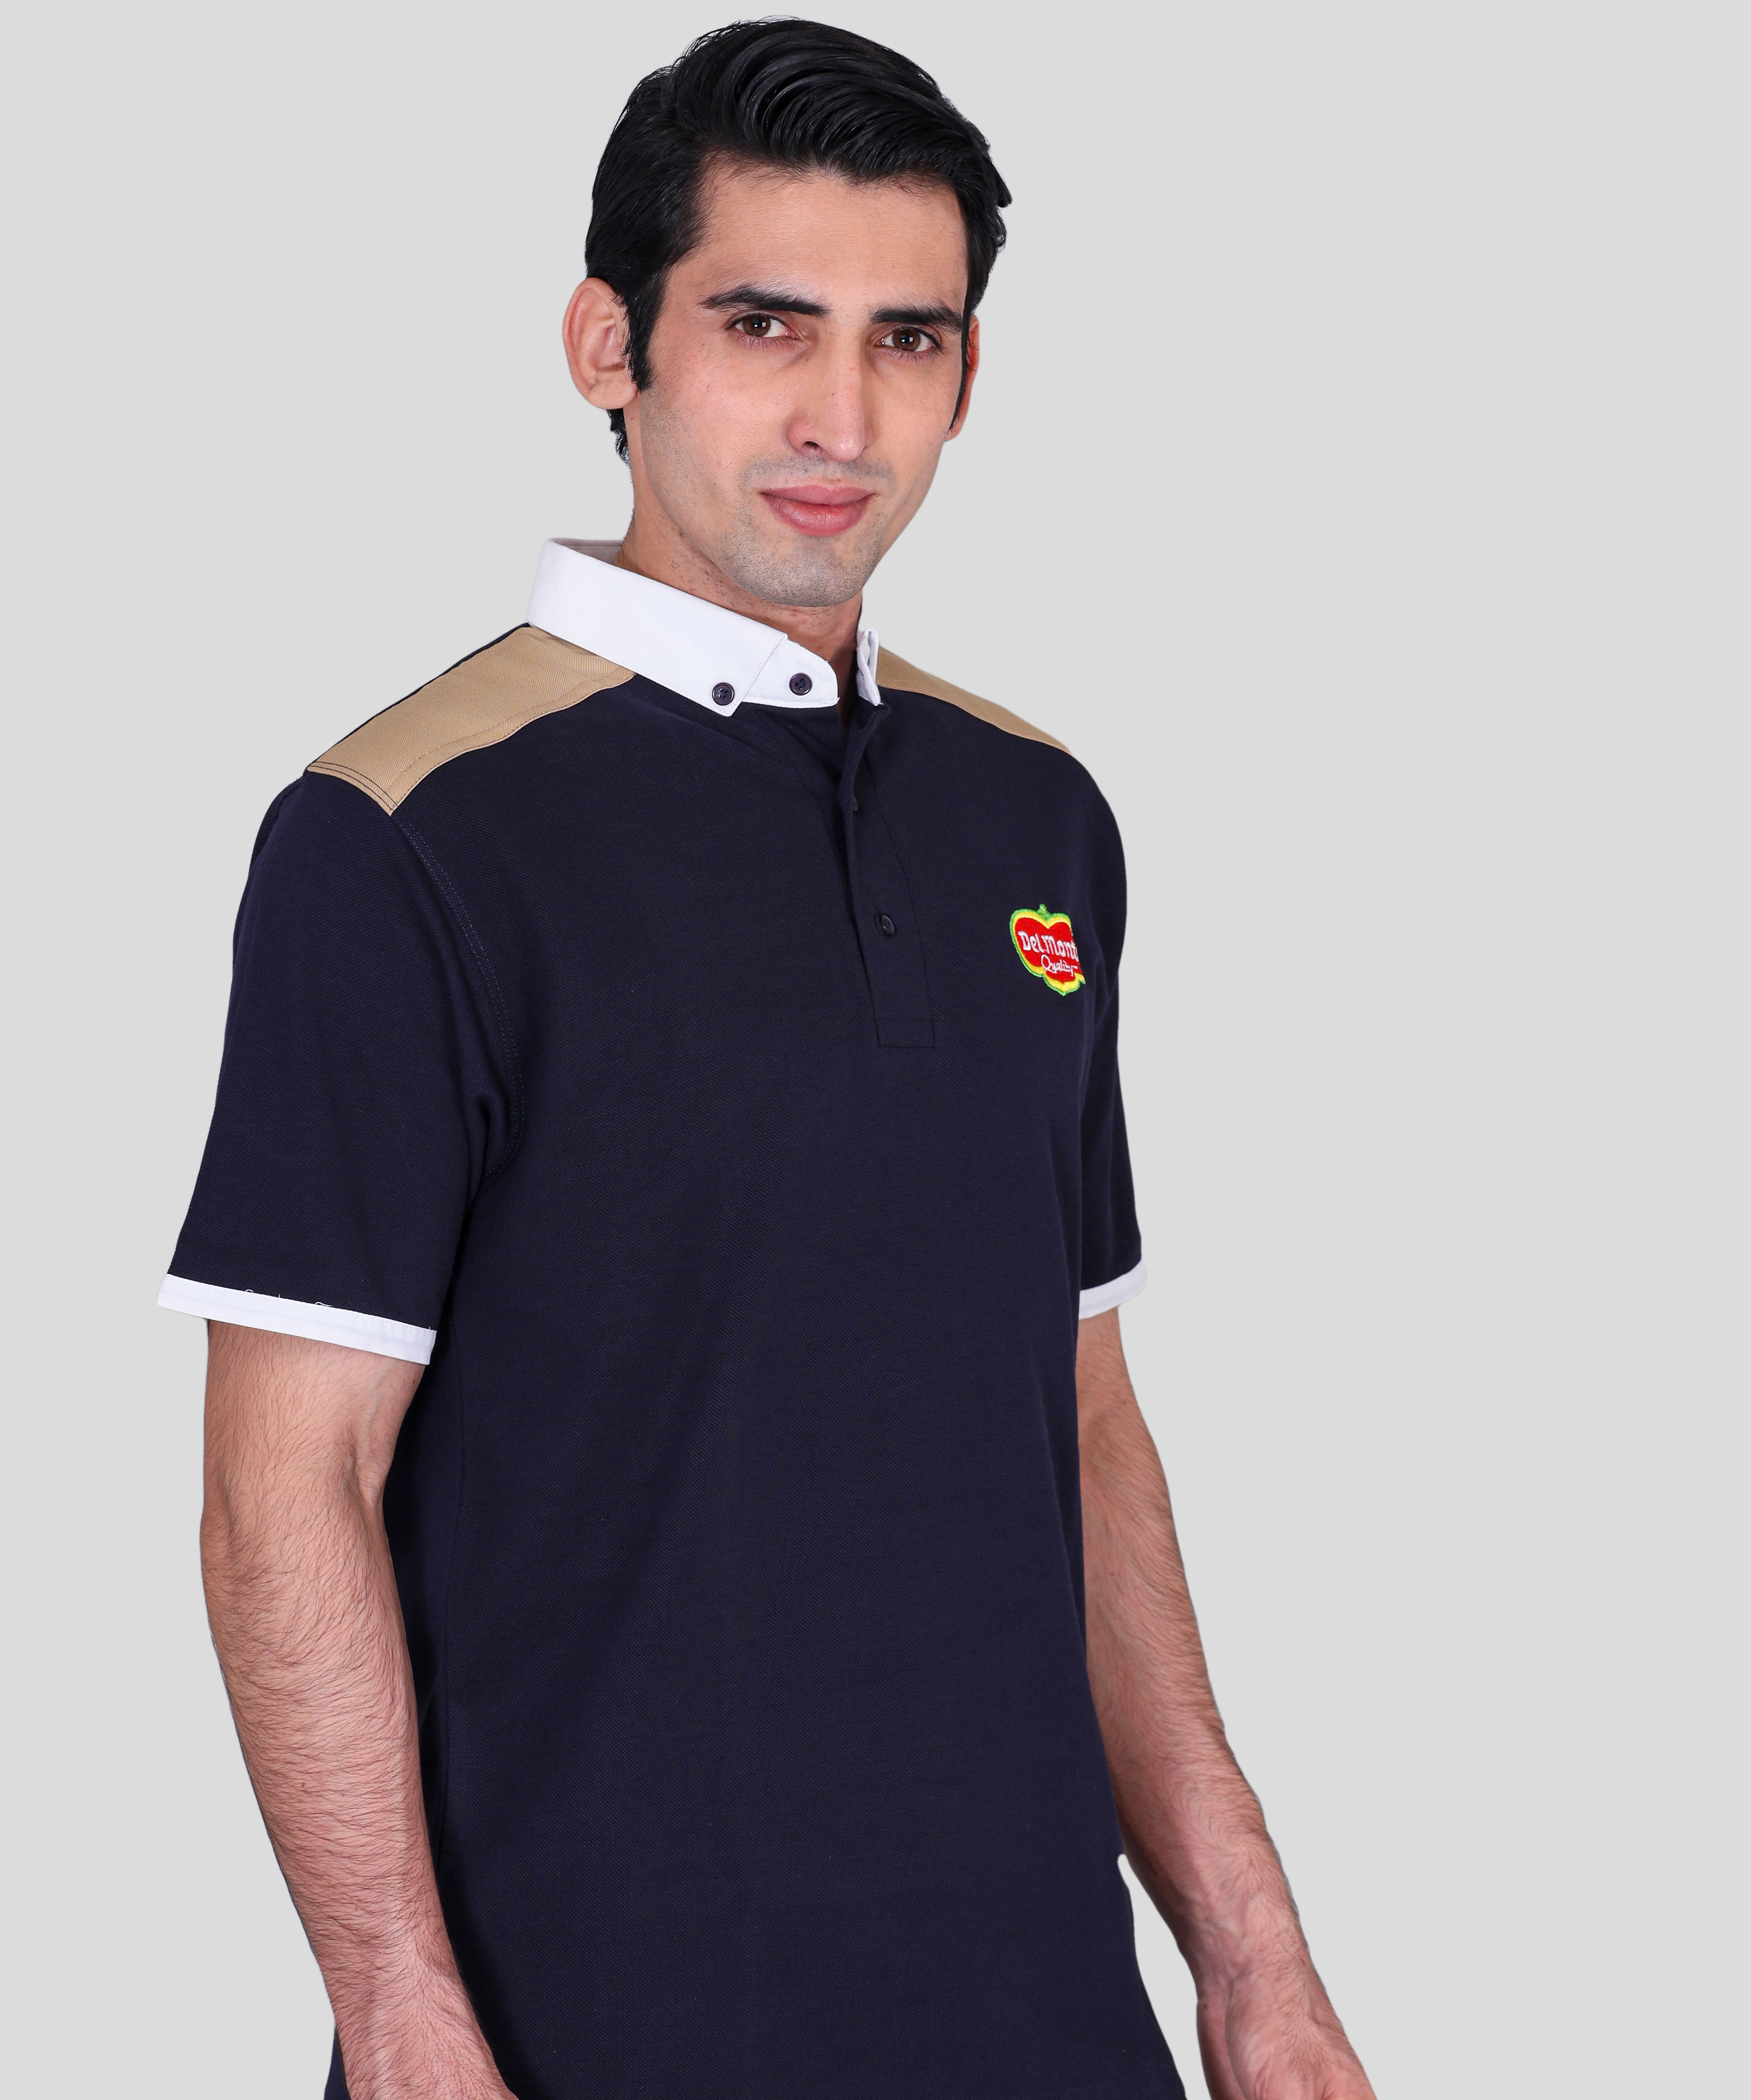 Del monte navy blue promotional polo t-shirts supplier 